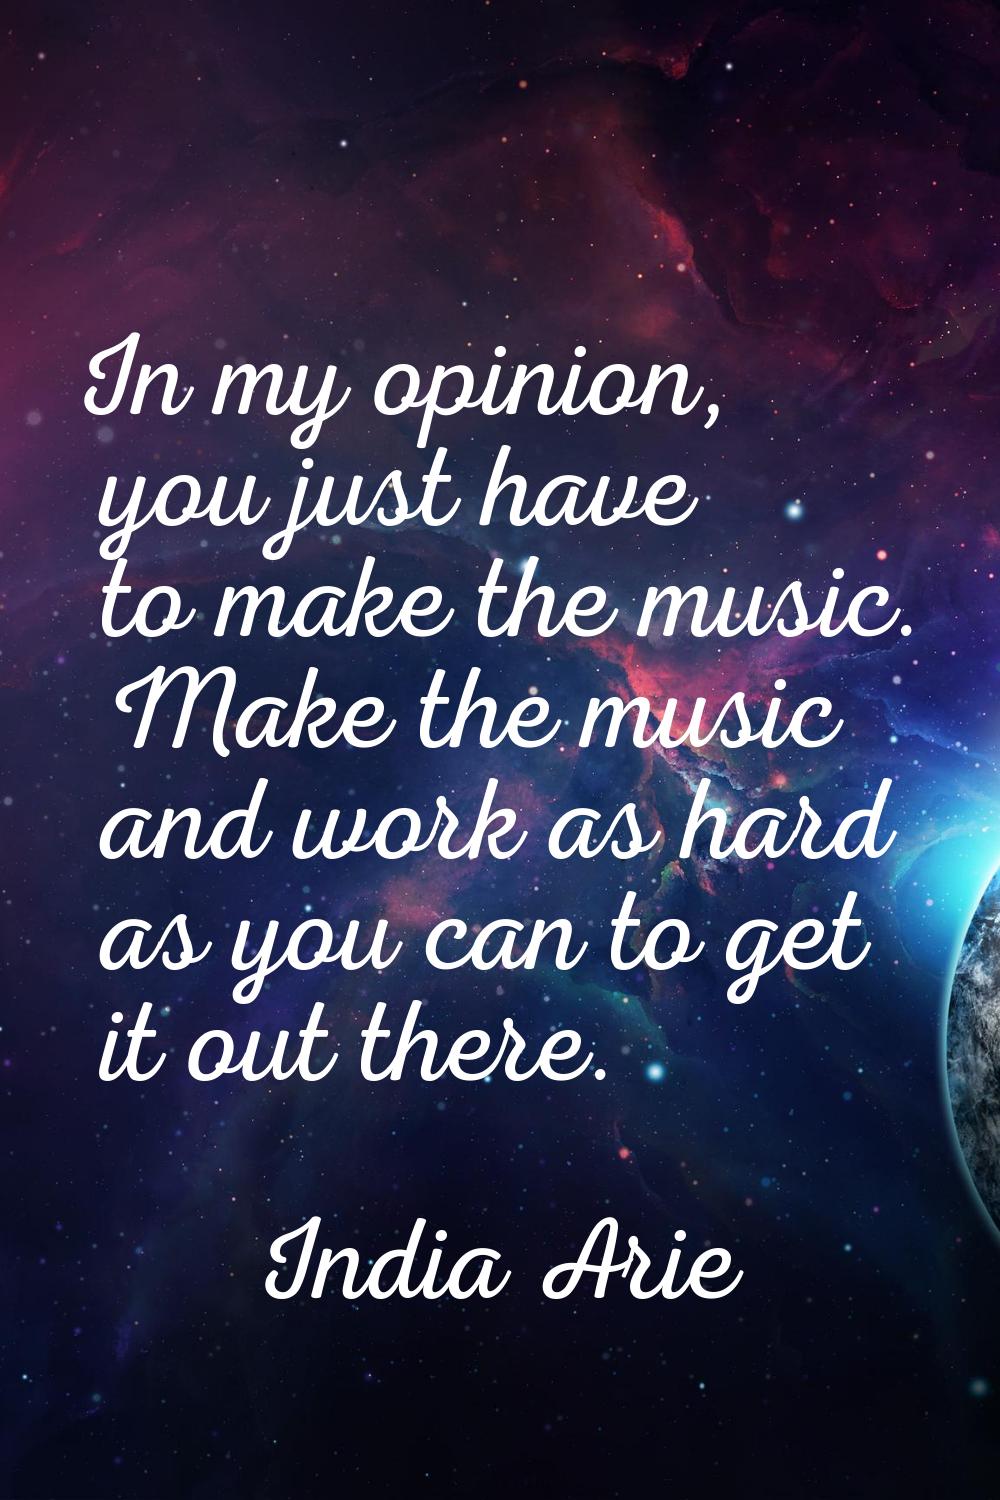 In my opinion, you just have to make the music. Make the music and work as hard as you can to get i